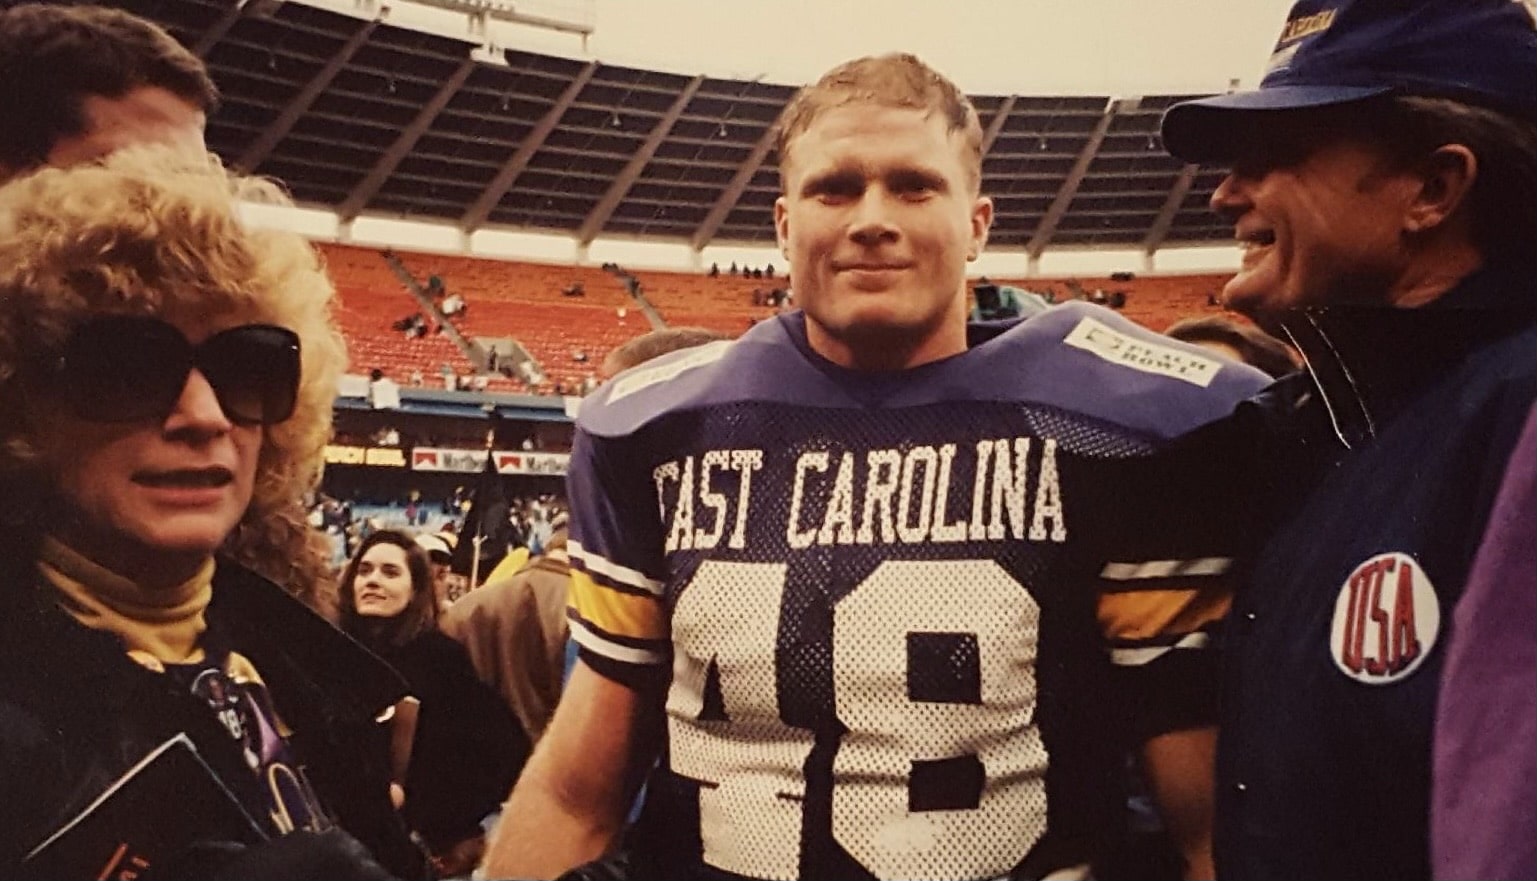 Stephen Braddy, a colon cancer survivor, stands with his family on the field following the 1992 Peach Bowl.